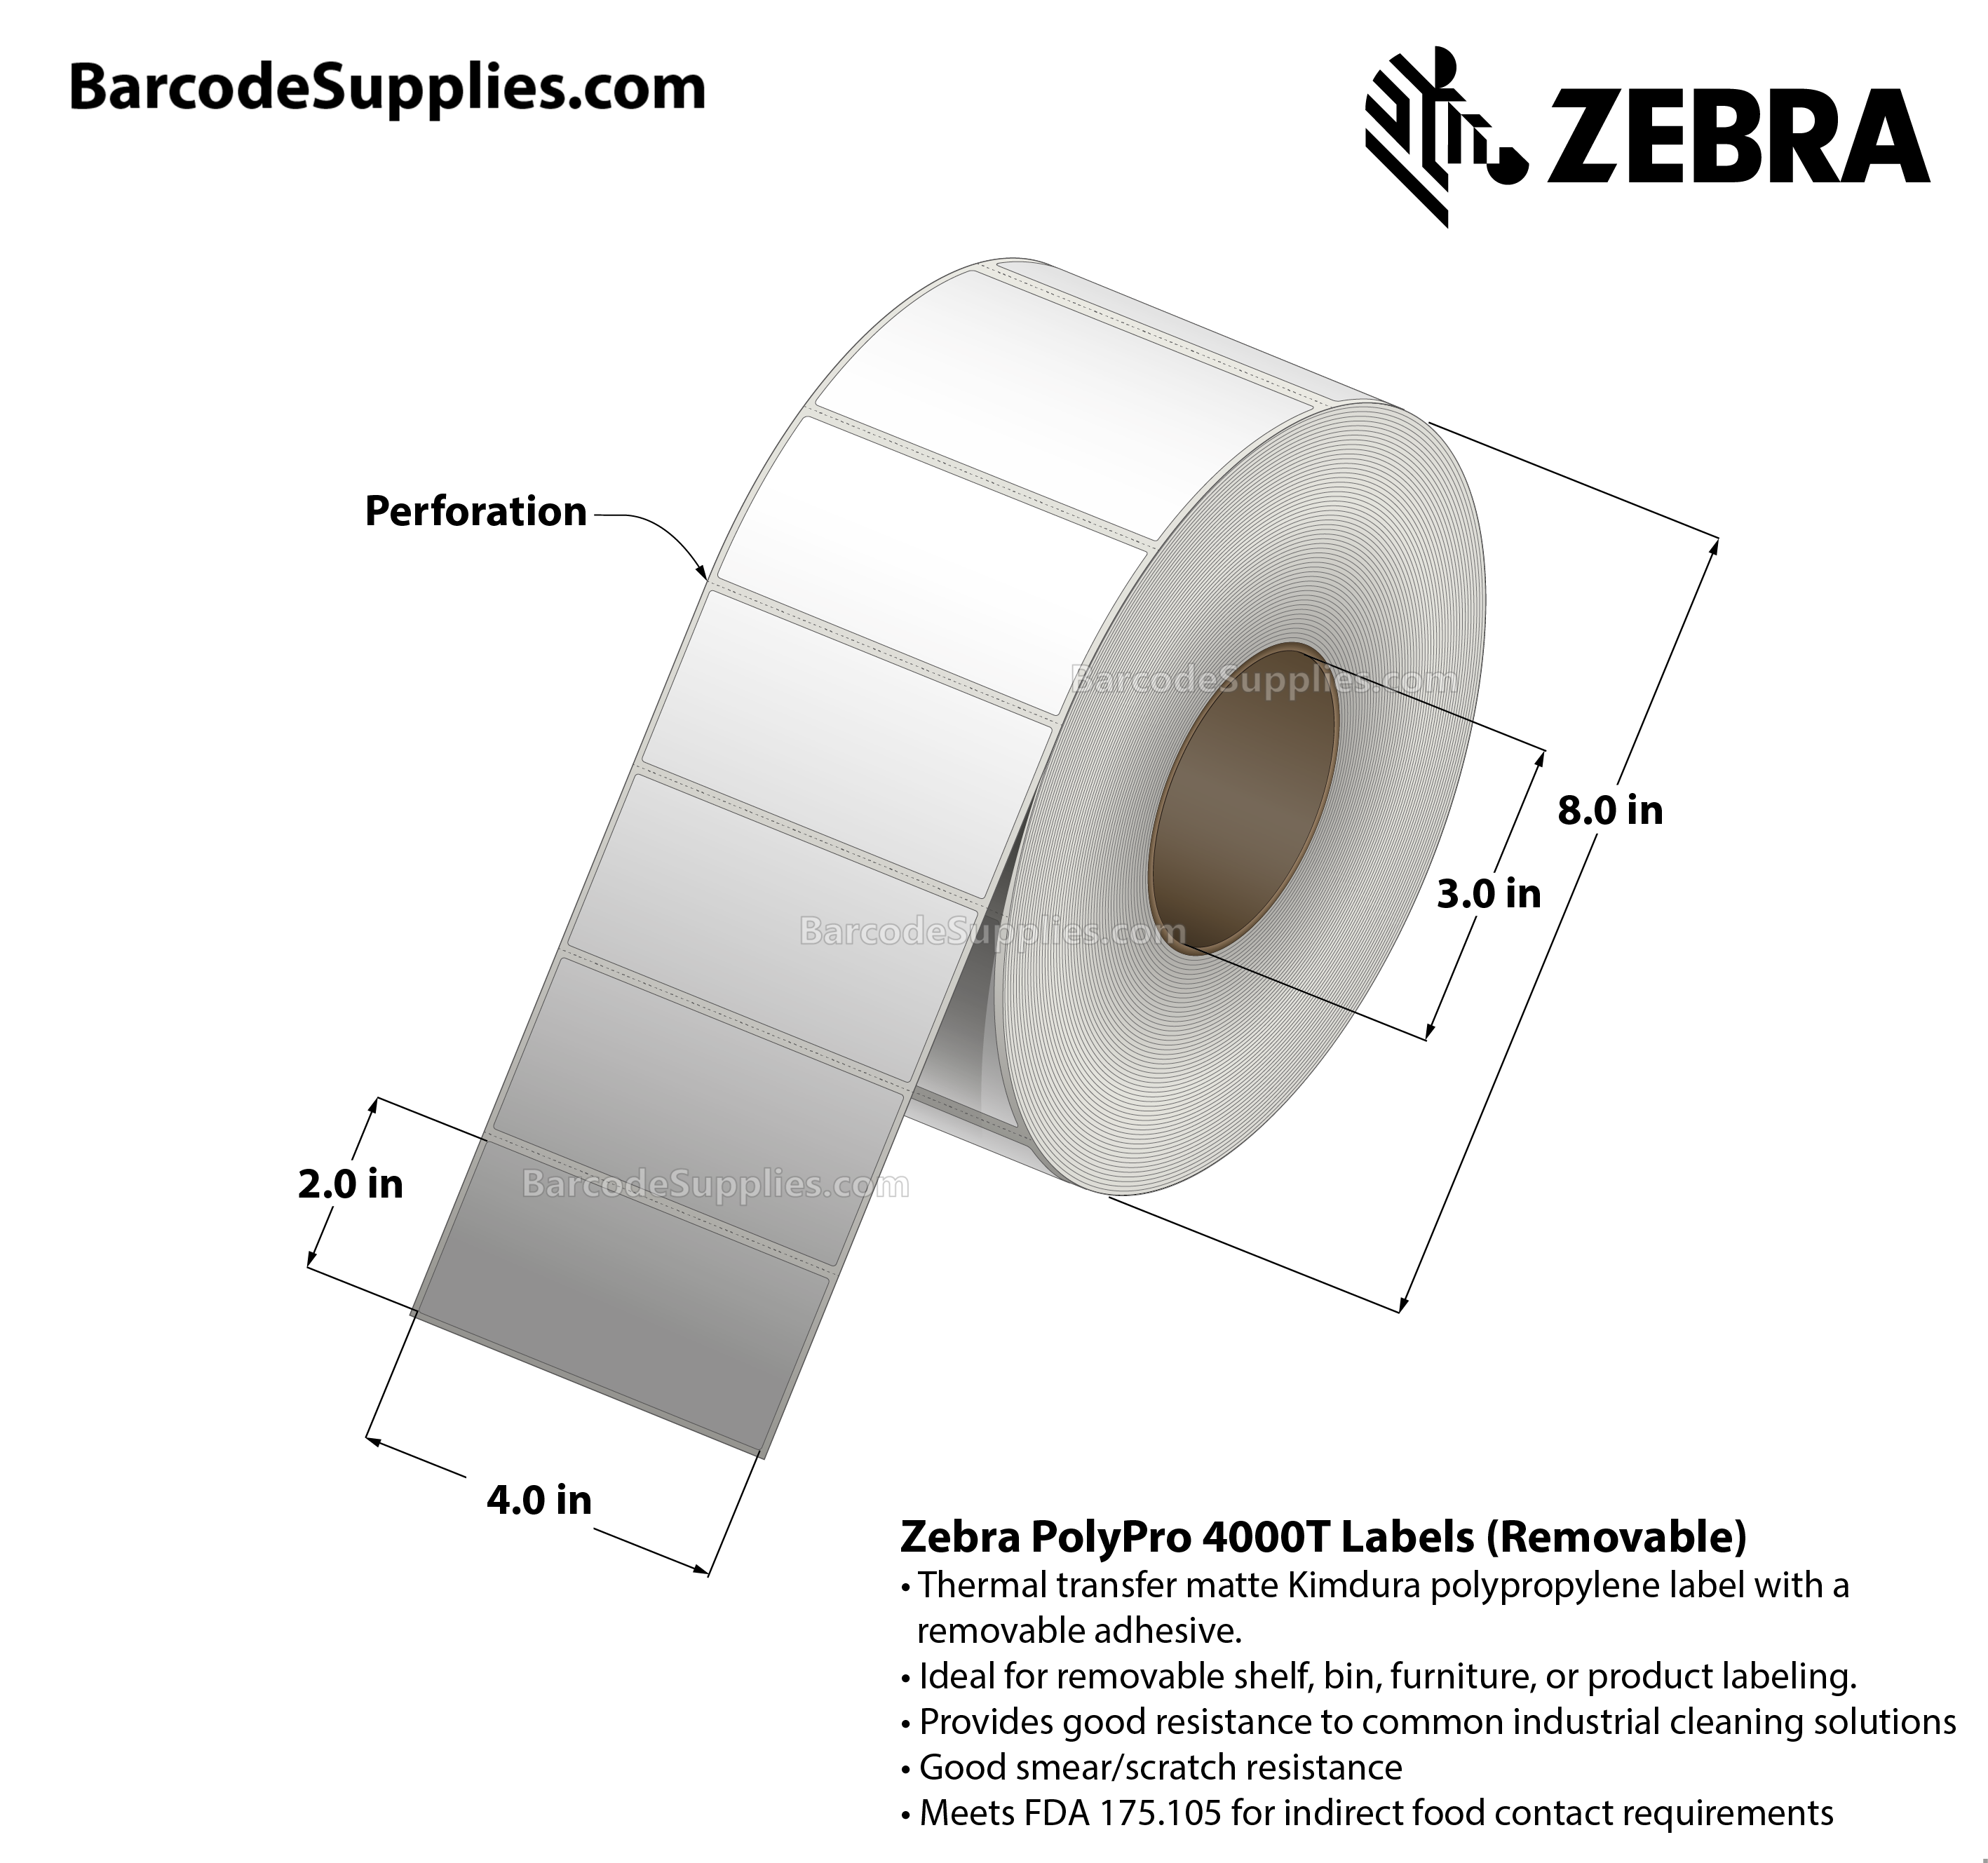 4 x 2 Thermal Transfer White PolyPro 4000T Removable Labels With Removable Adhesive - Perforated - 1000 Labels Per Roll - Carton Of 1 Rolls - 1000 Labels Total - MPN: 10022938